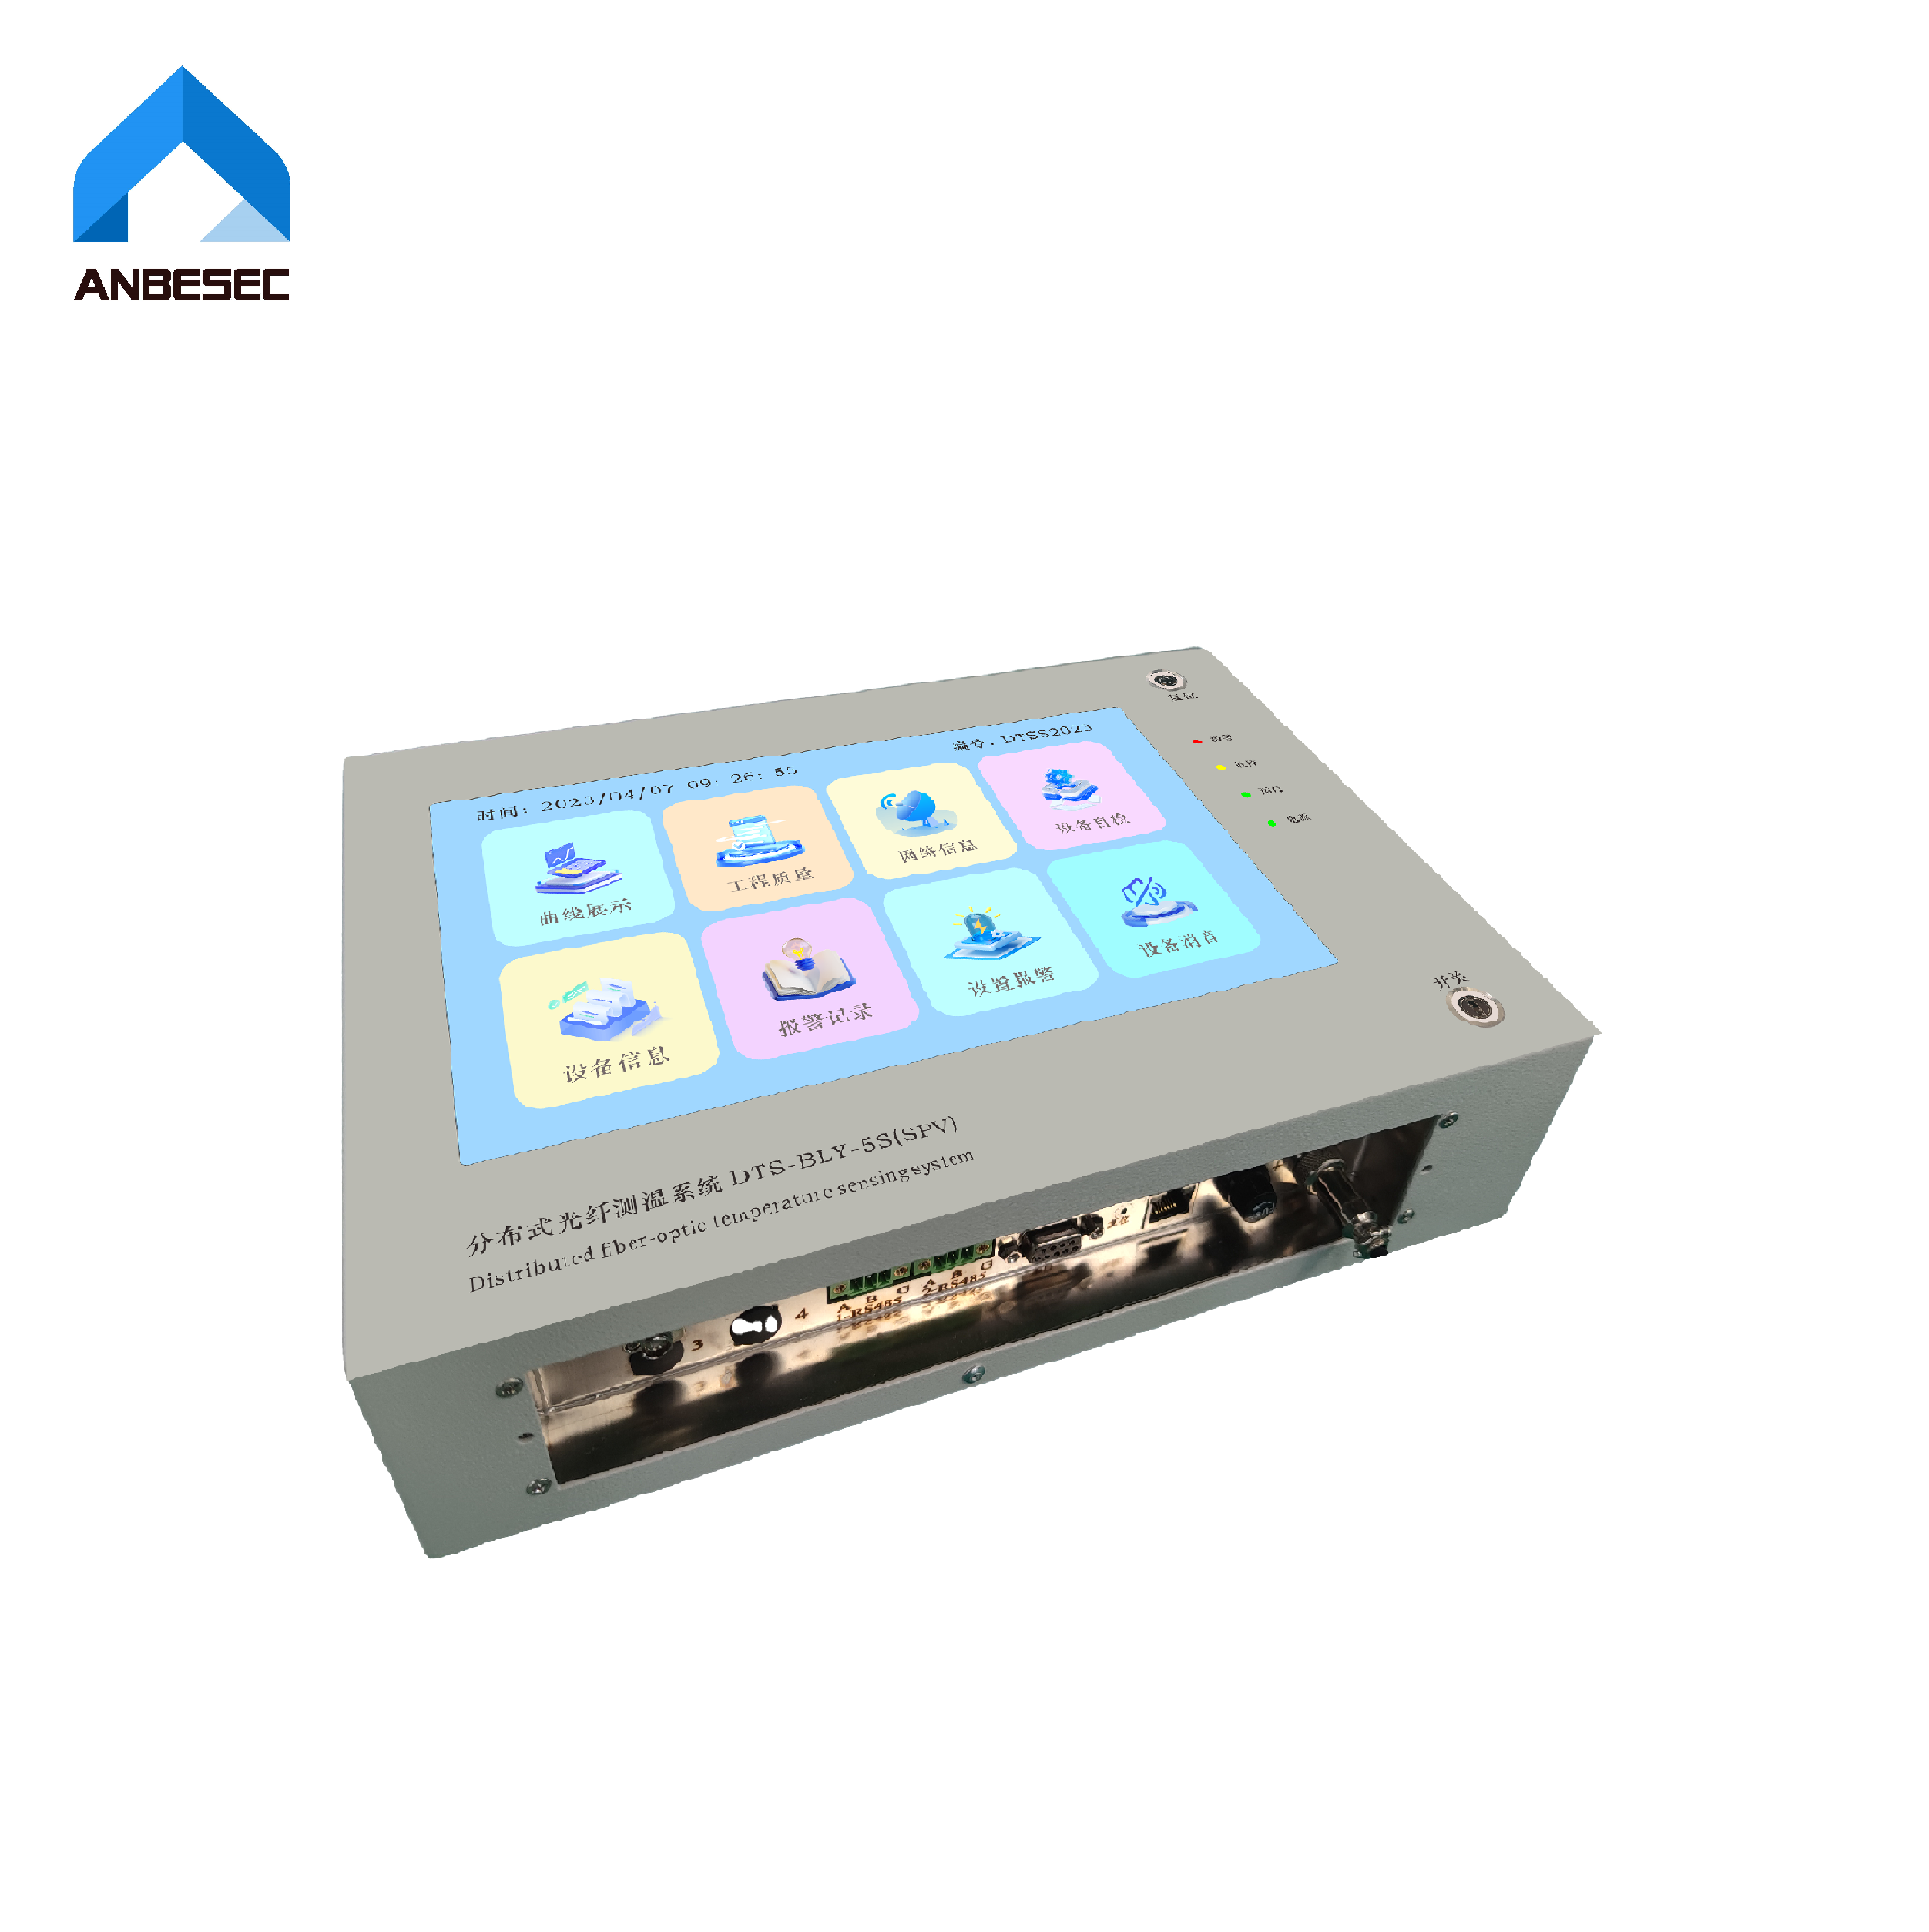 /distributed-temperature-sensing-dts-product/